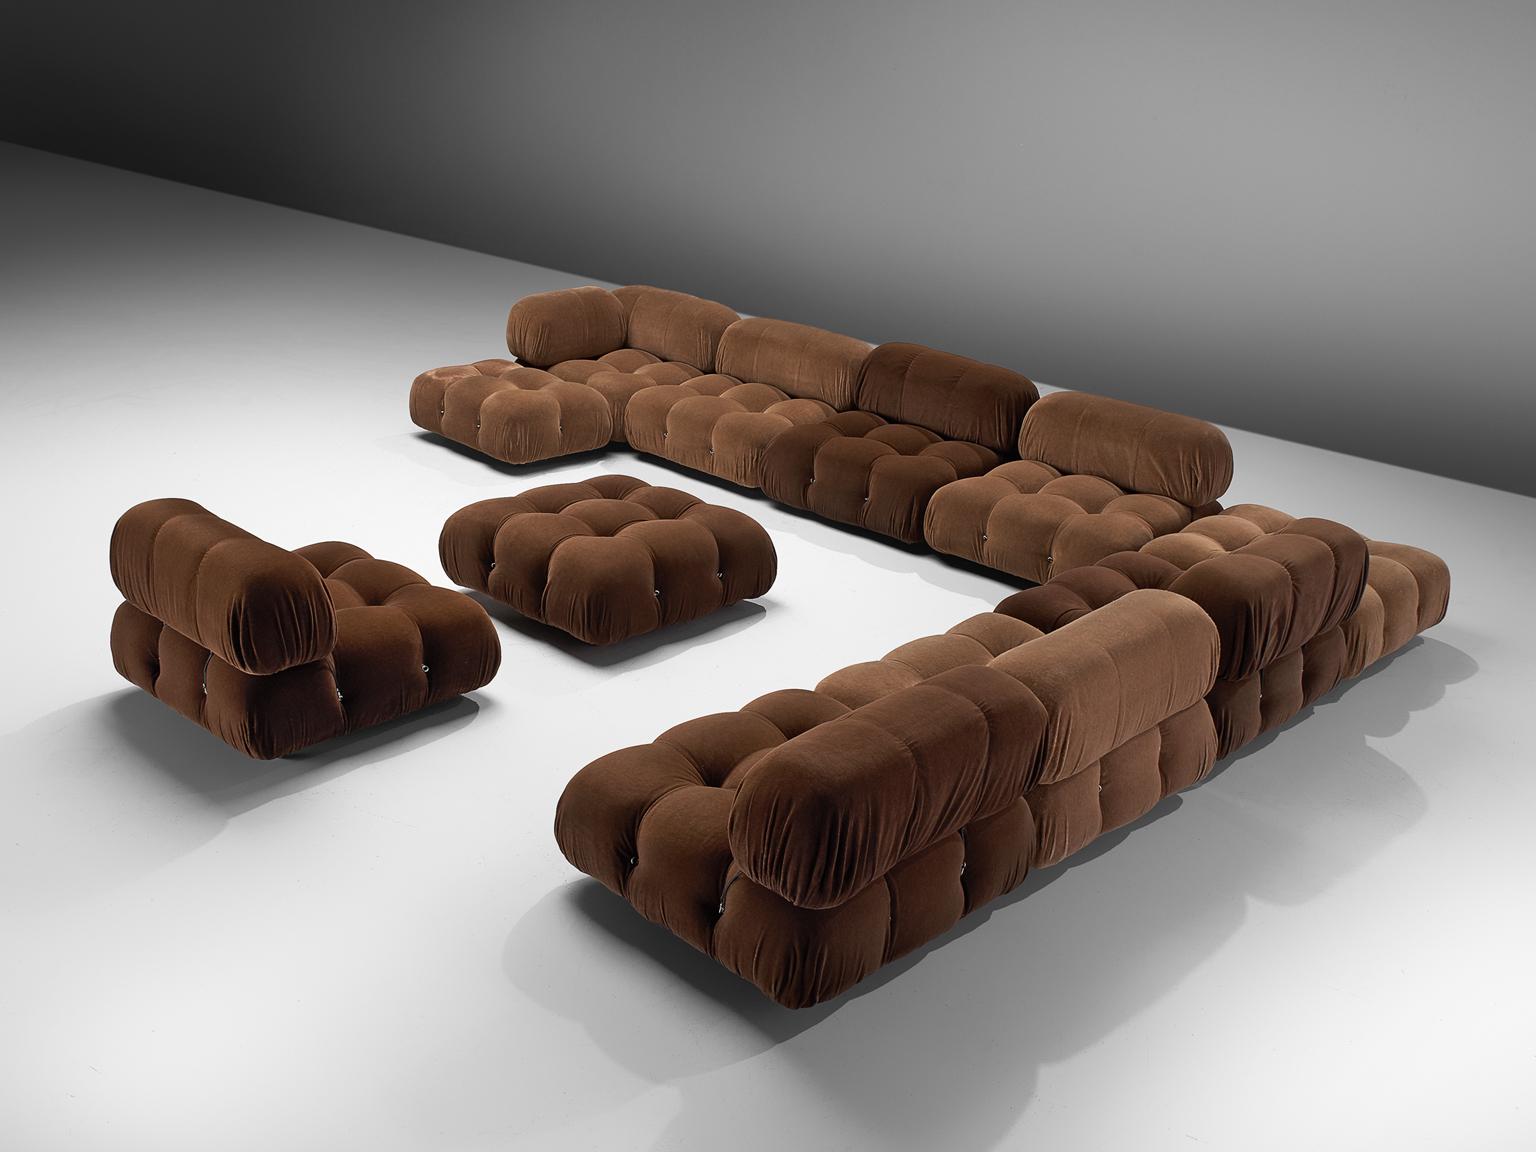 Mario Bellini, 'Camaleonda' sofa, in light brown and dark brown upholstery, Italy, 1972.

This sofa is made on request in our upholstery atelier. The sectional elements this sofa was made with, can be used freely and apart from one another. The